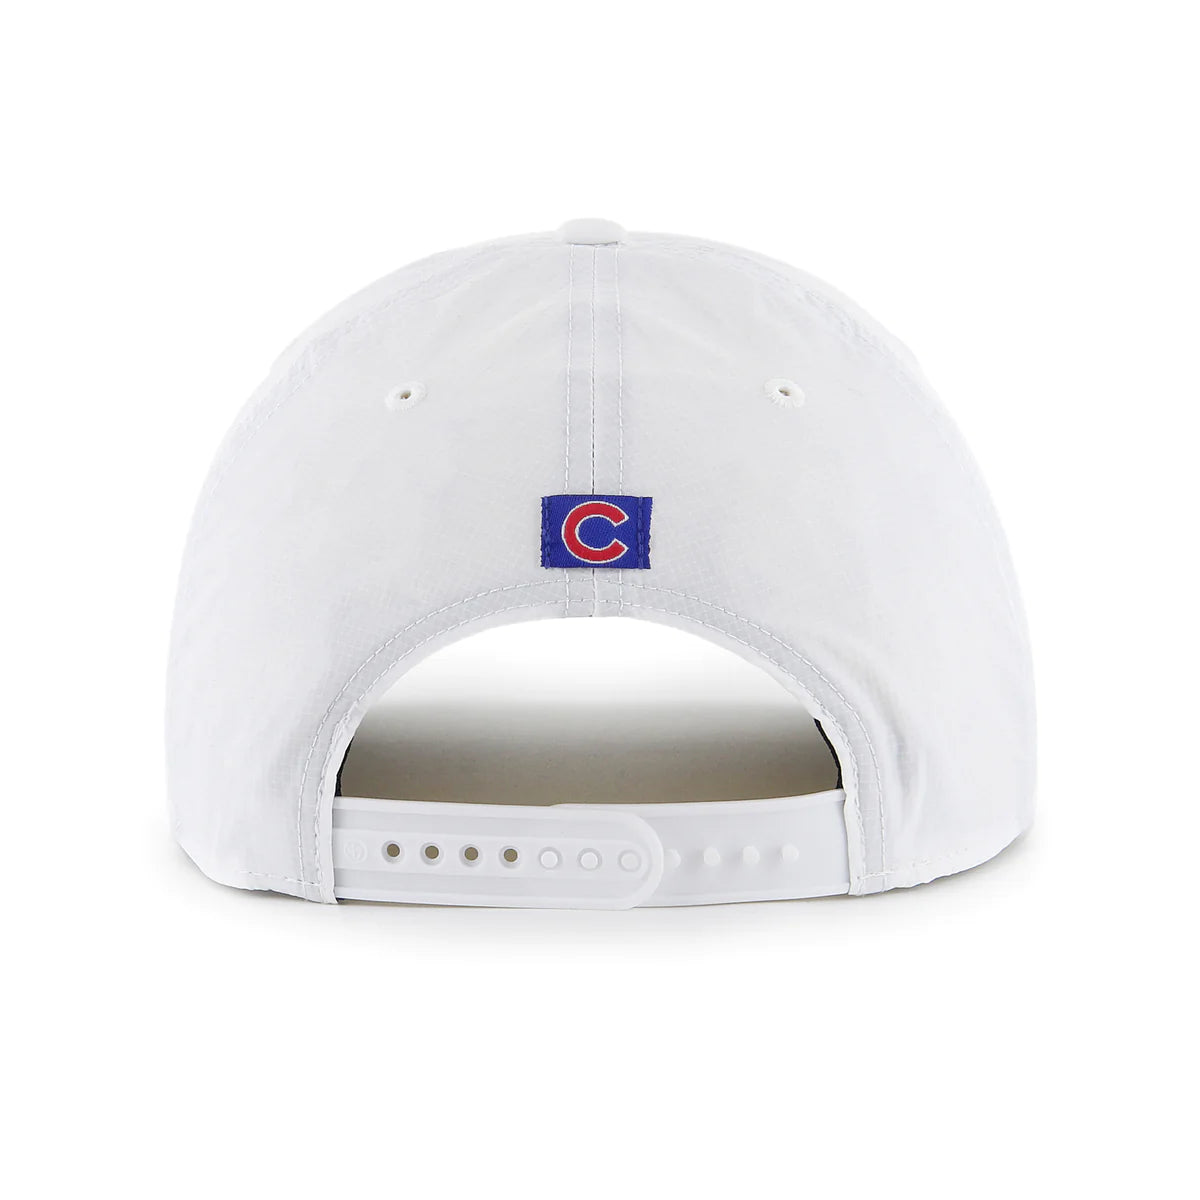 CHICAGO CUBS '47 HITCH WHITE CLASSIC SNAPBACK ROPE CAP